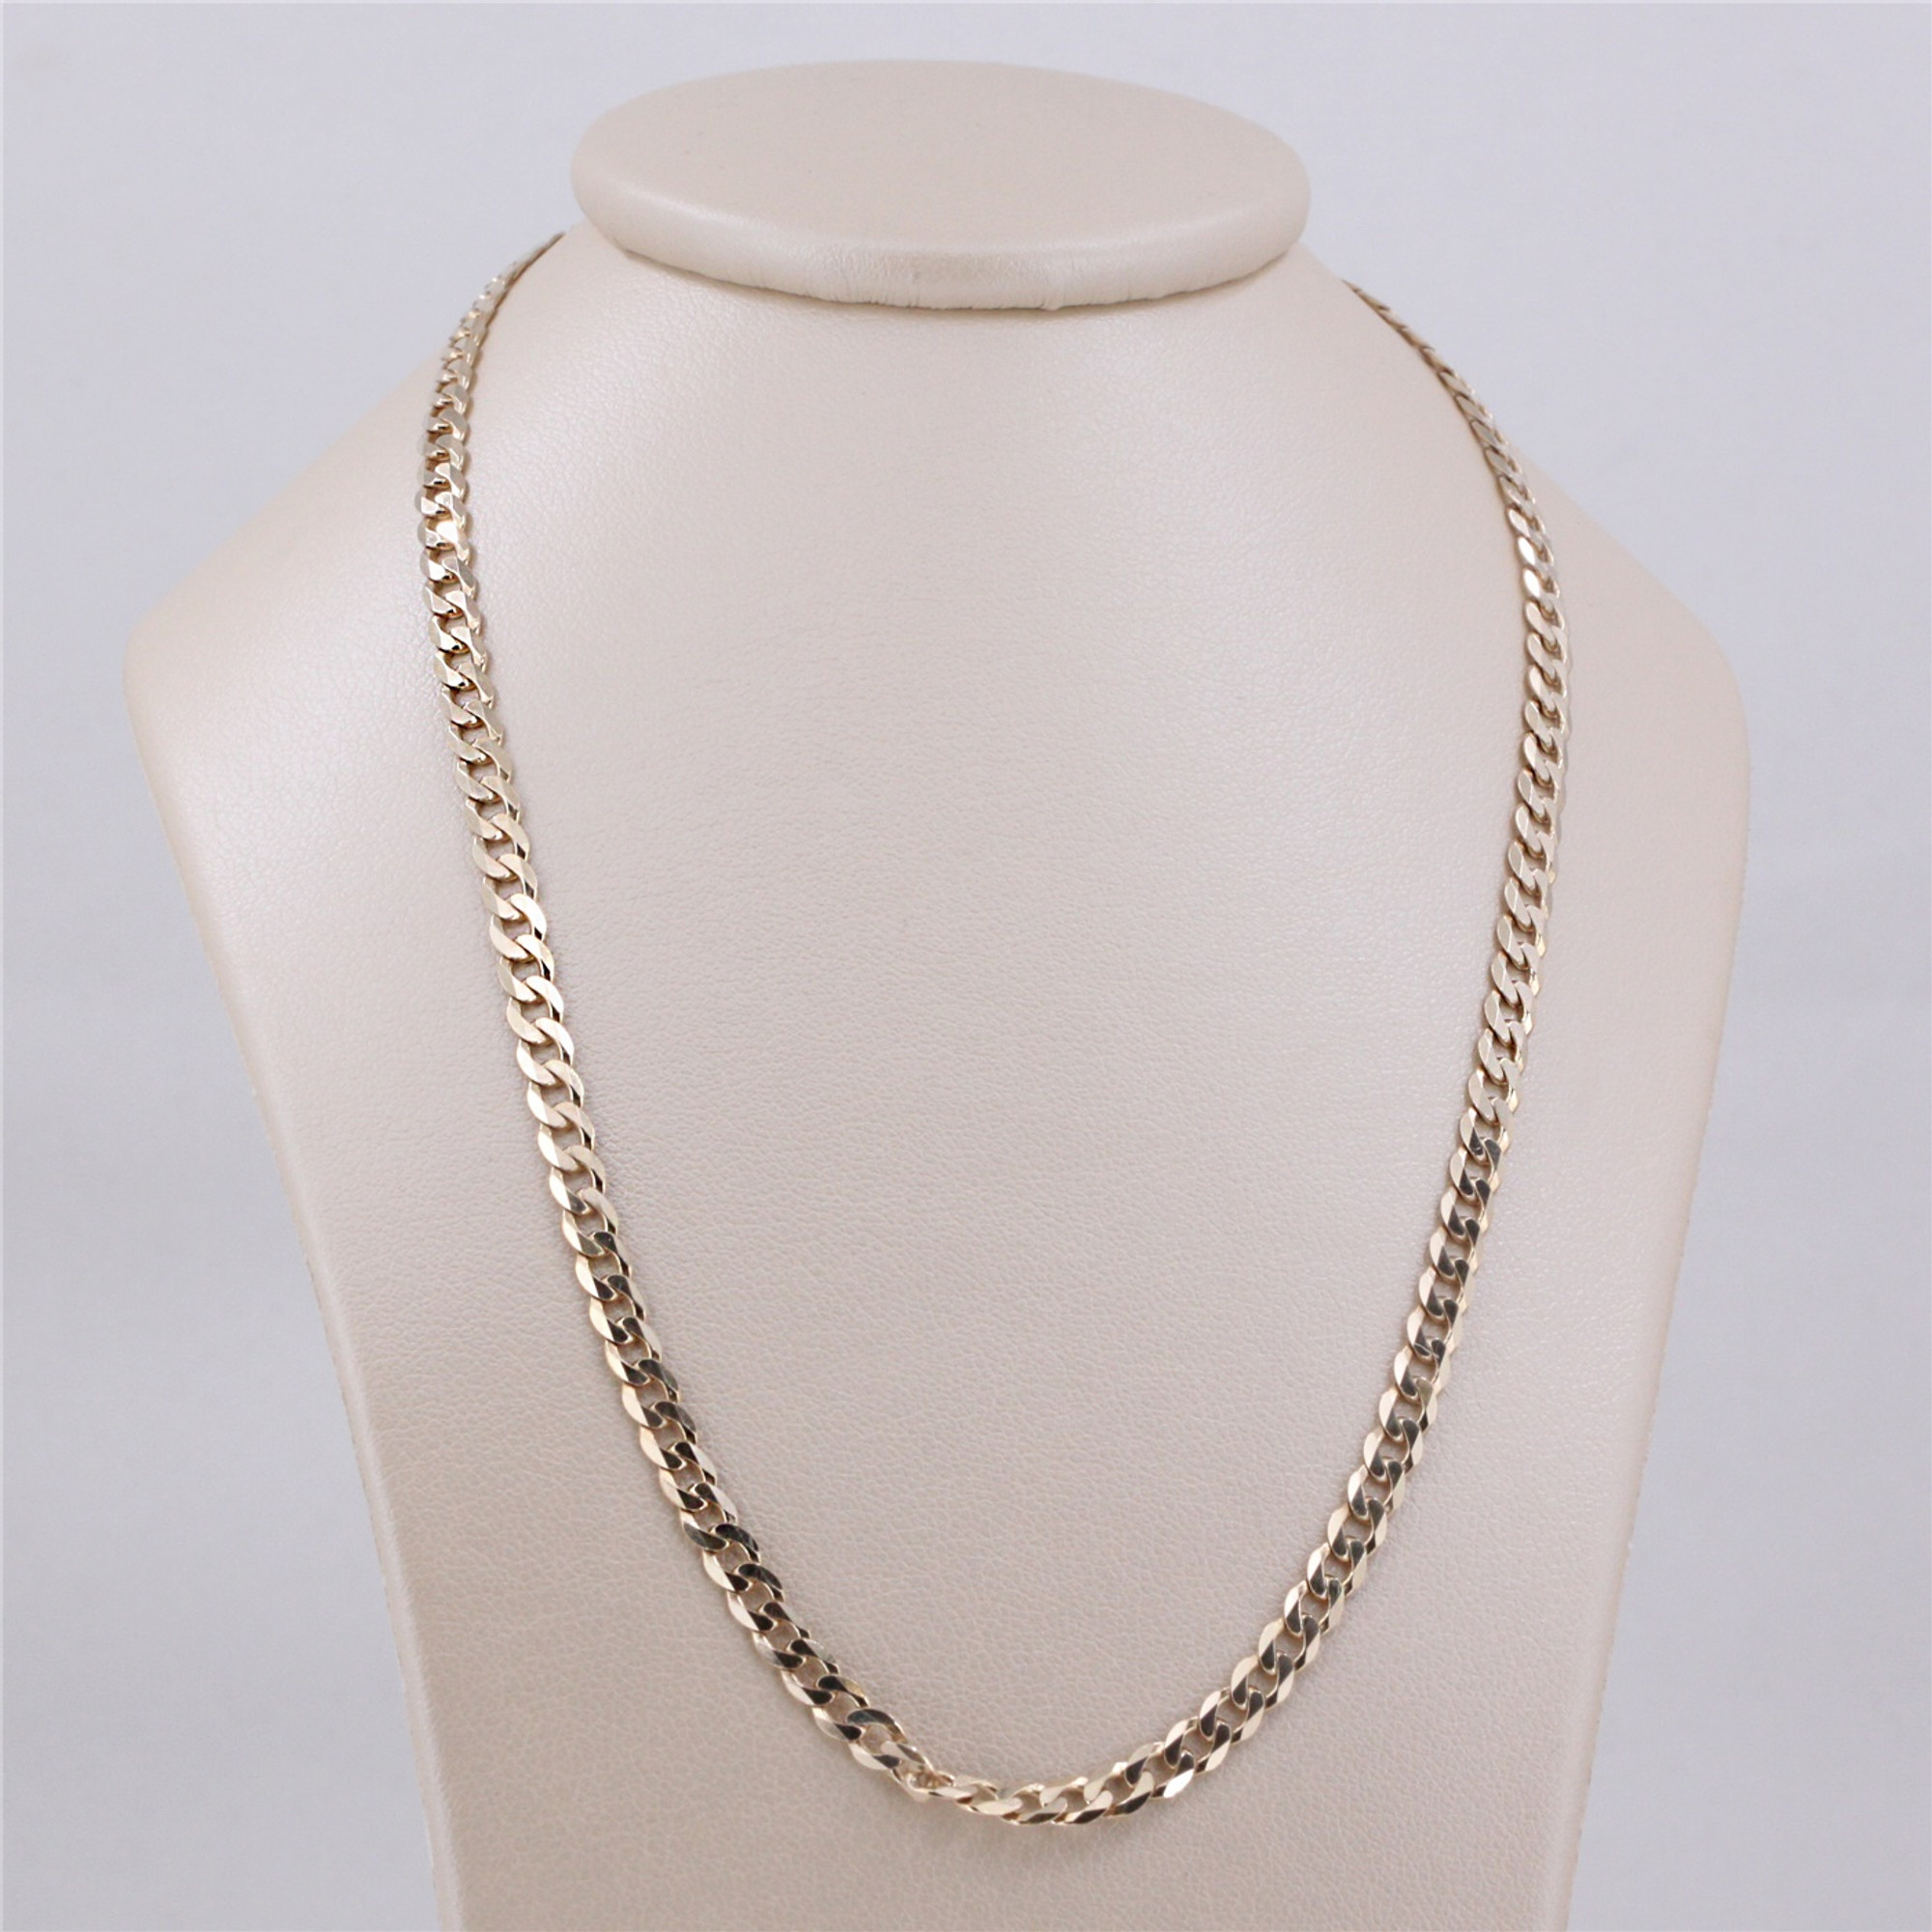 10K White Gold Serpentine Style Chain or Necklace (item #1383483)